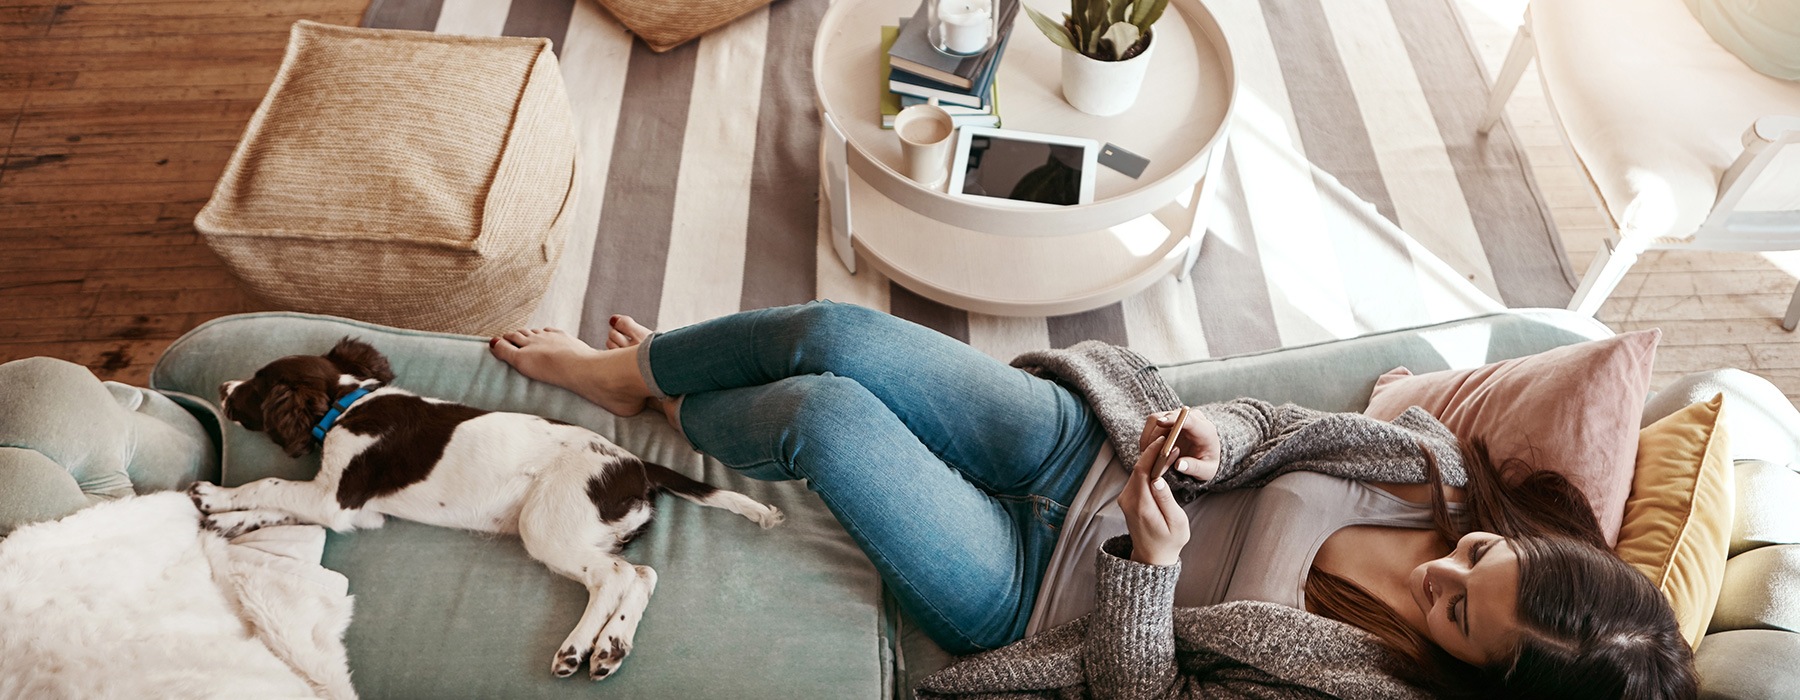 lifestyle image of a young woman laying on a couch beside her pet in a living room